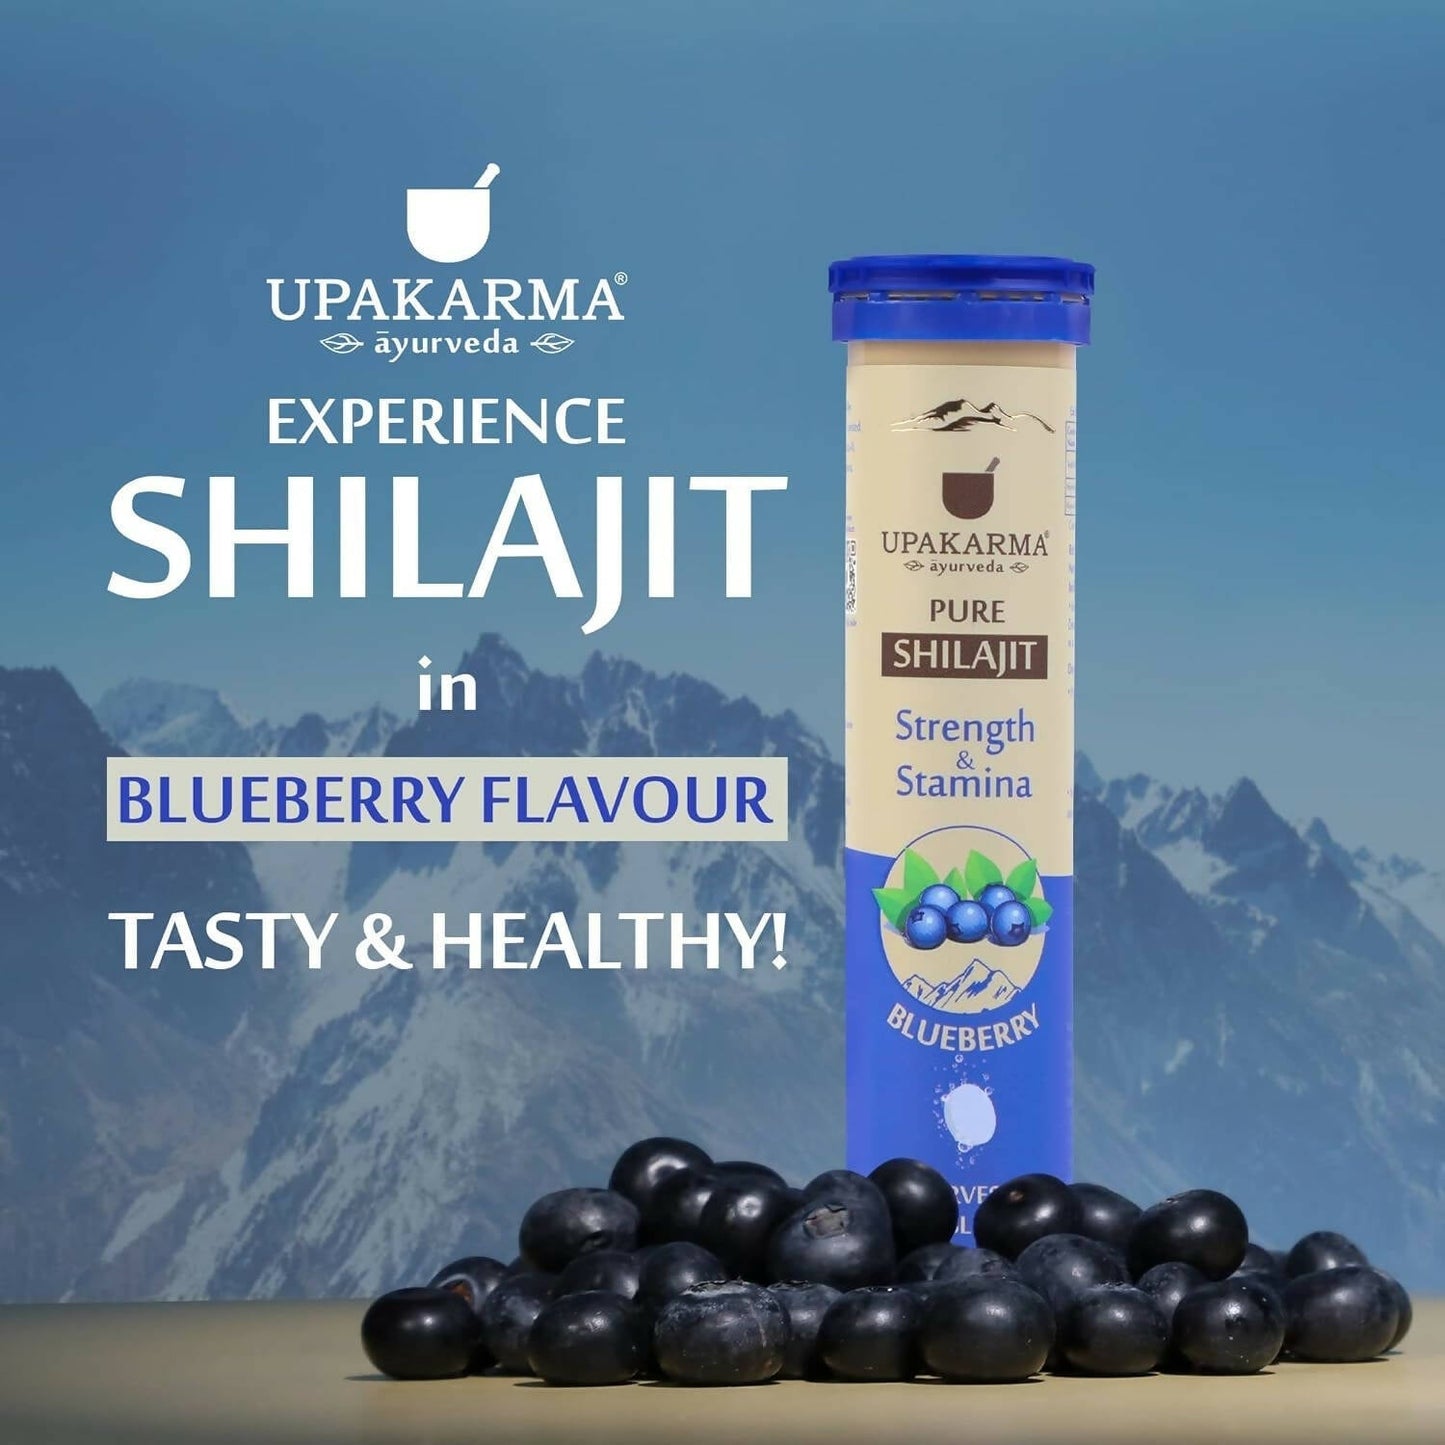 Upakarma Ayurveda Pure SJ Effervescent Tablets in 2 Unique Flavors (Pure SJ & Blueberry) Combo